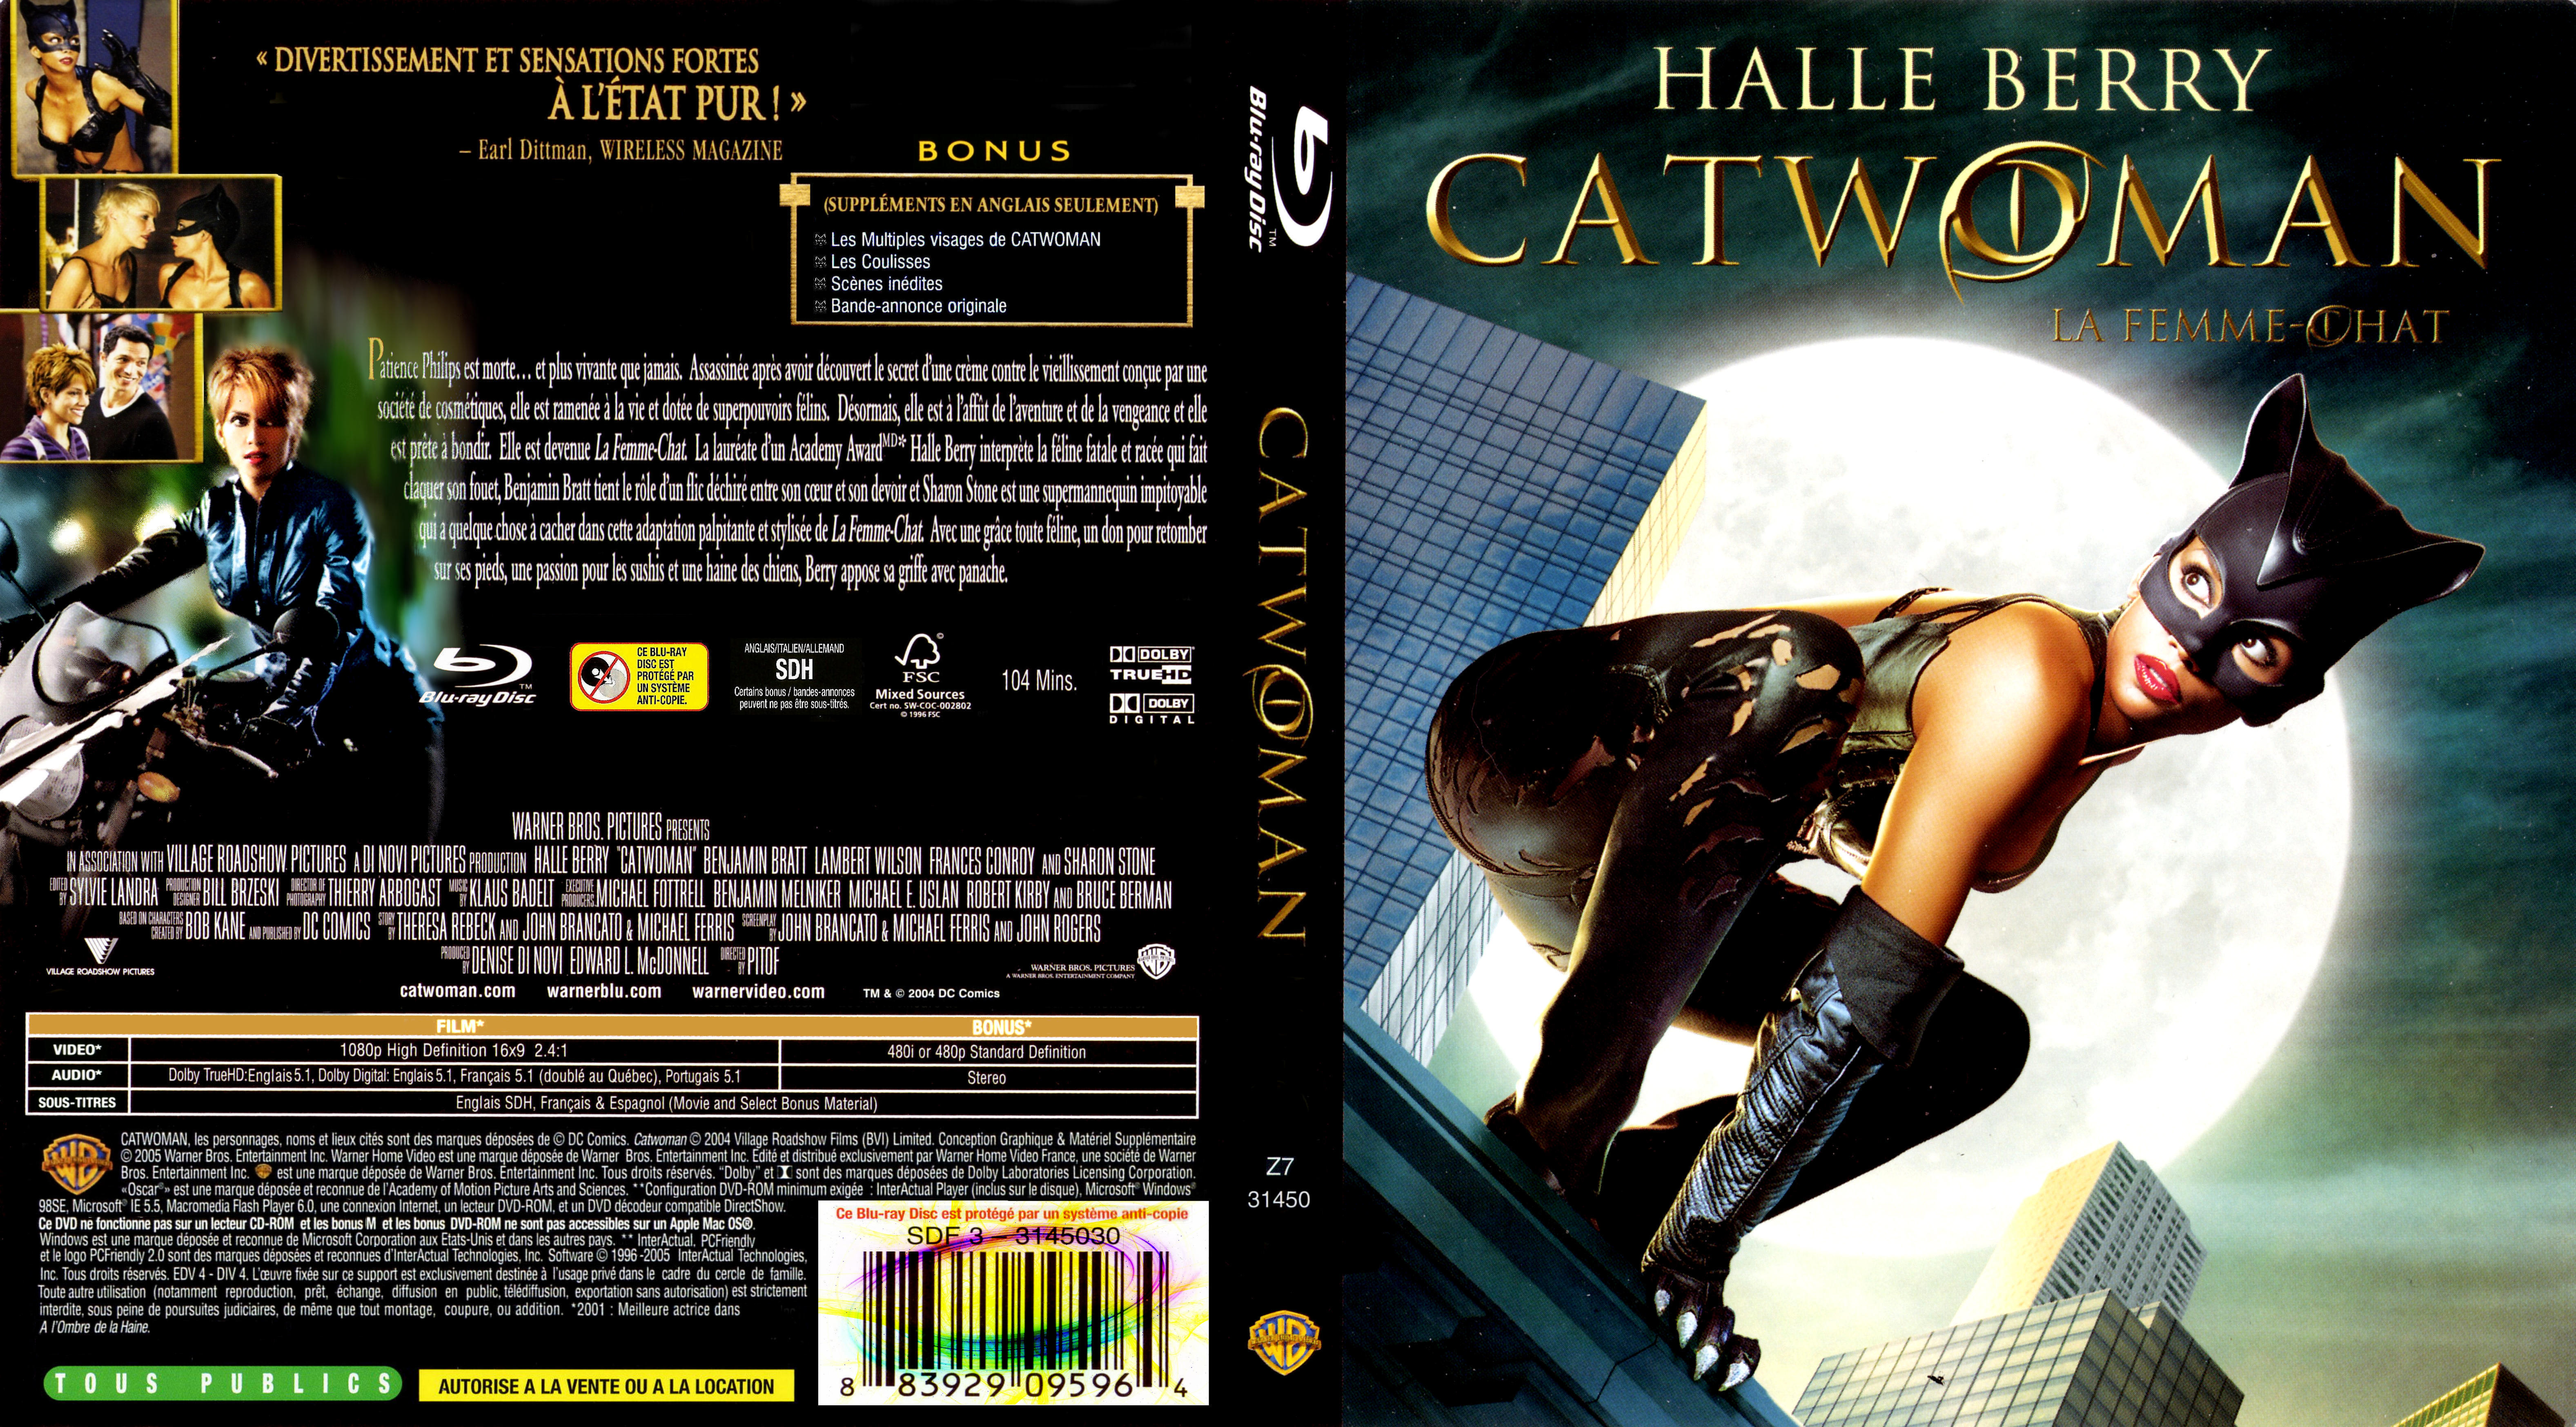 Jaquette DVD Catwoman (BLU-RAY)